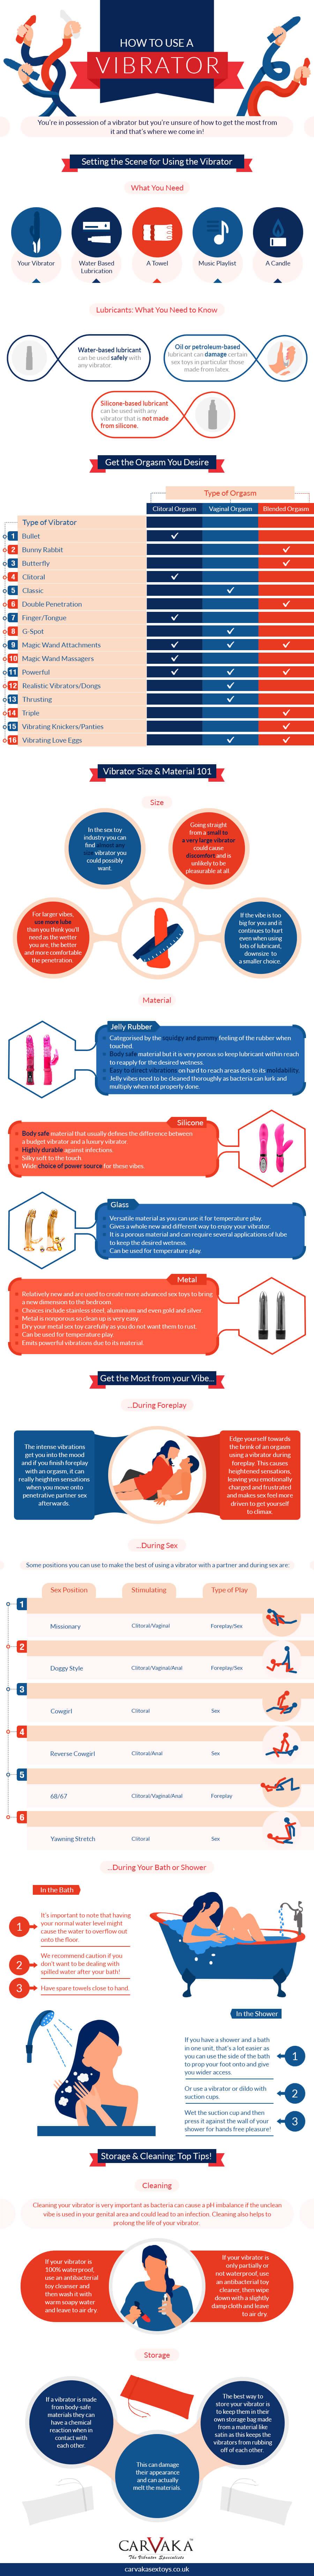 Carvaka Infographic for How to Use a Vibrator